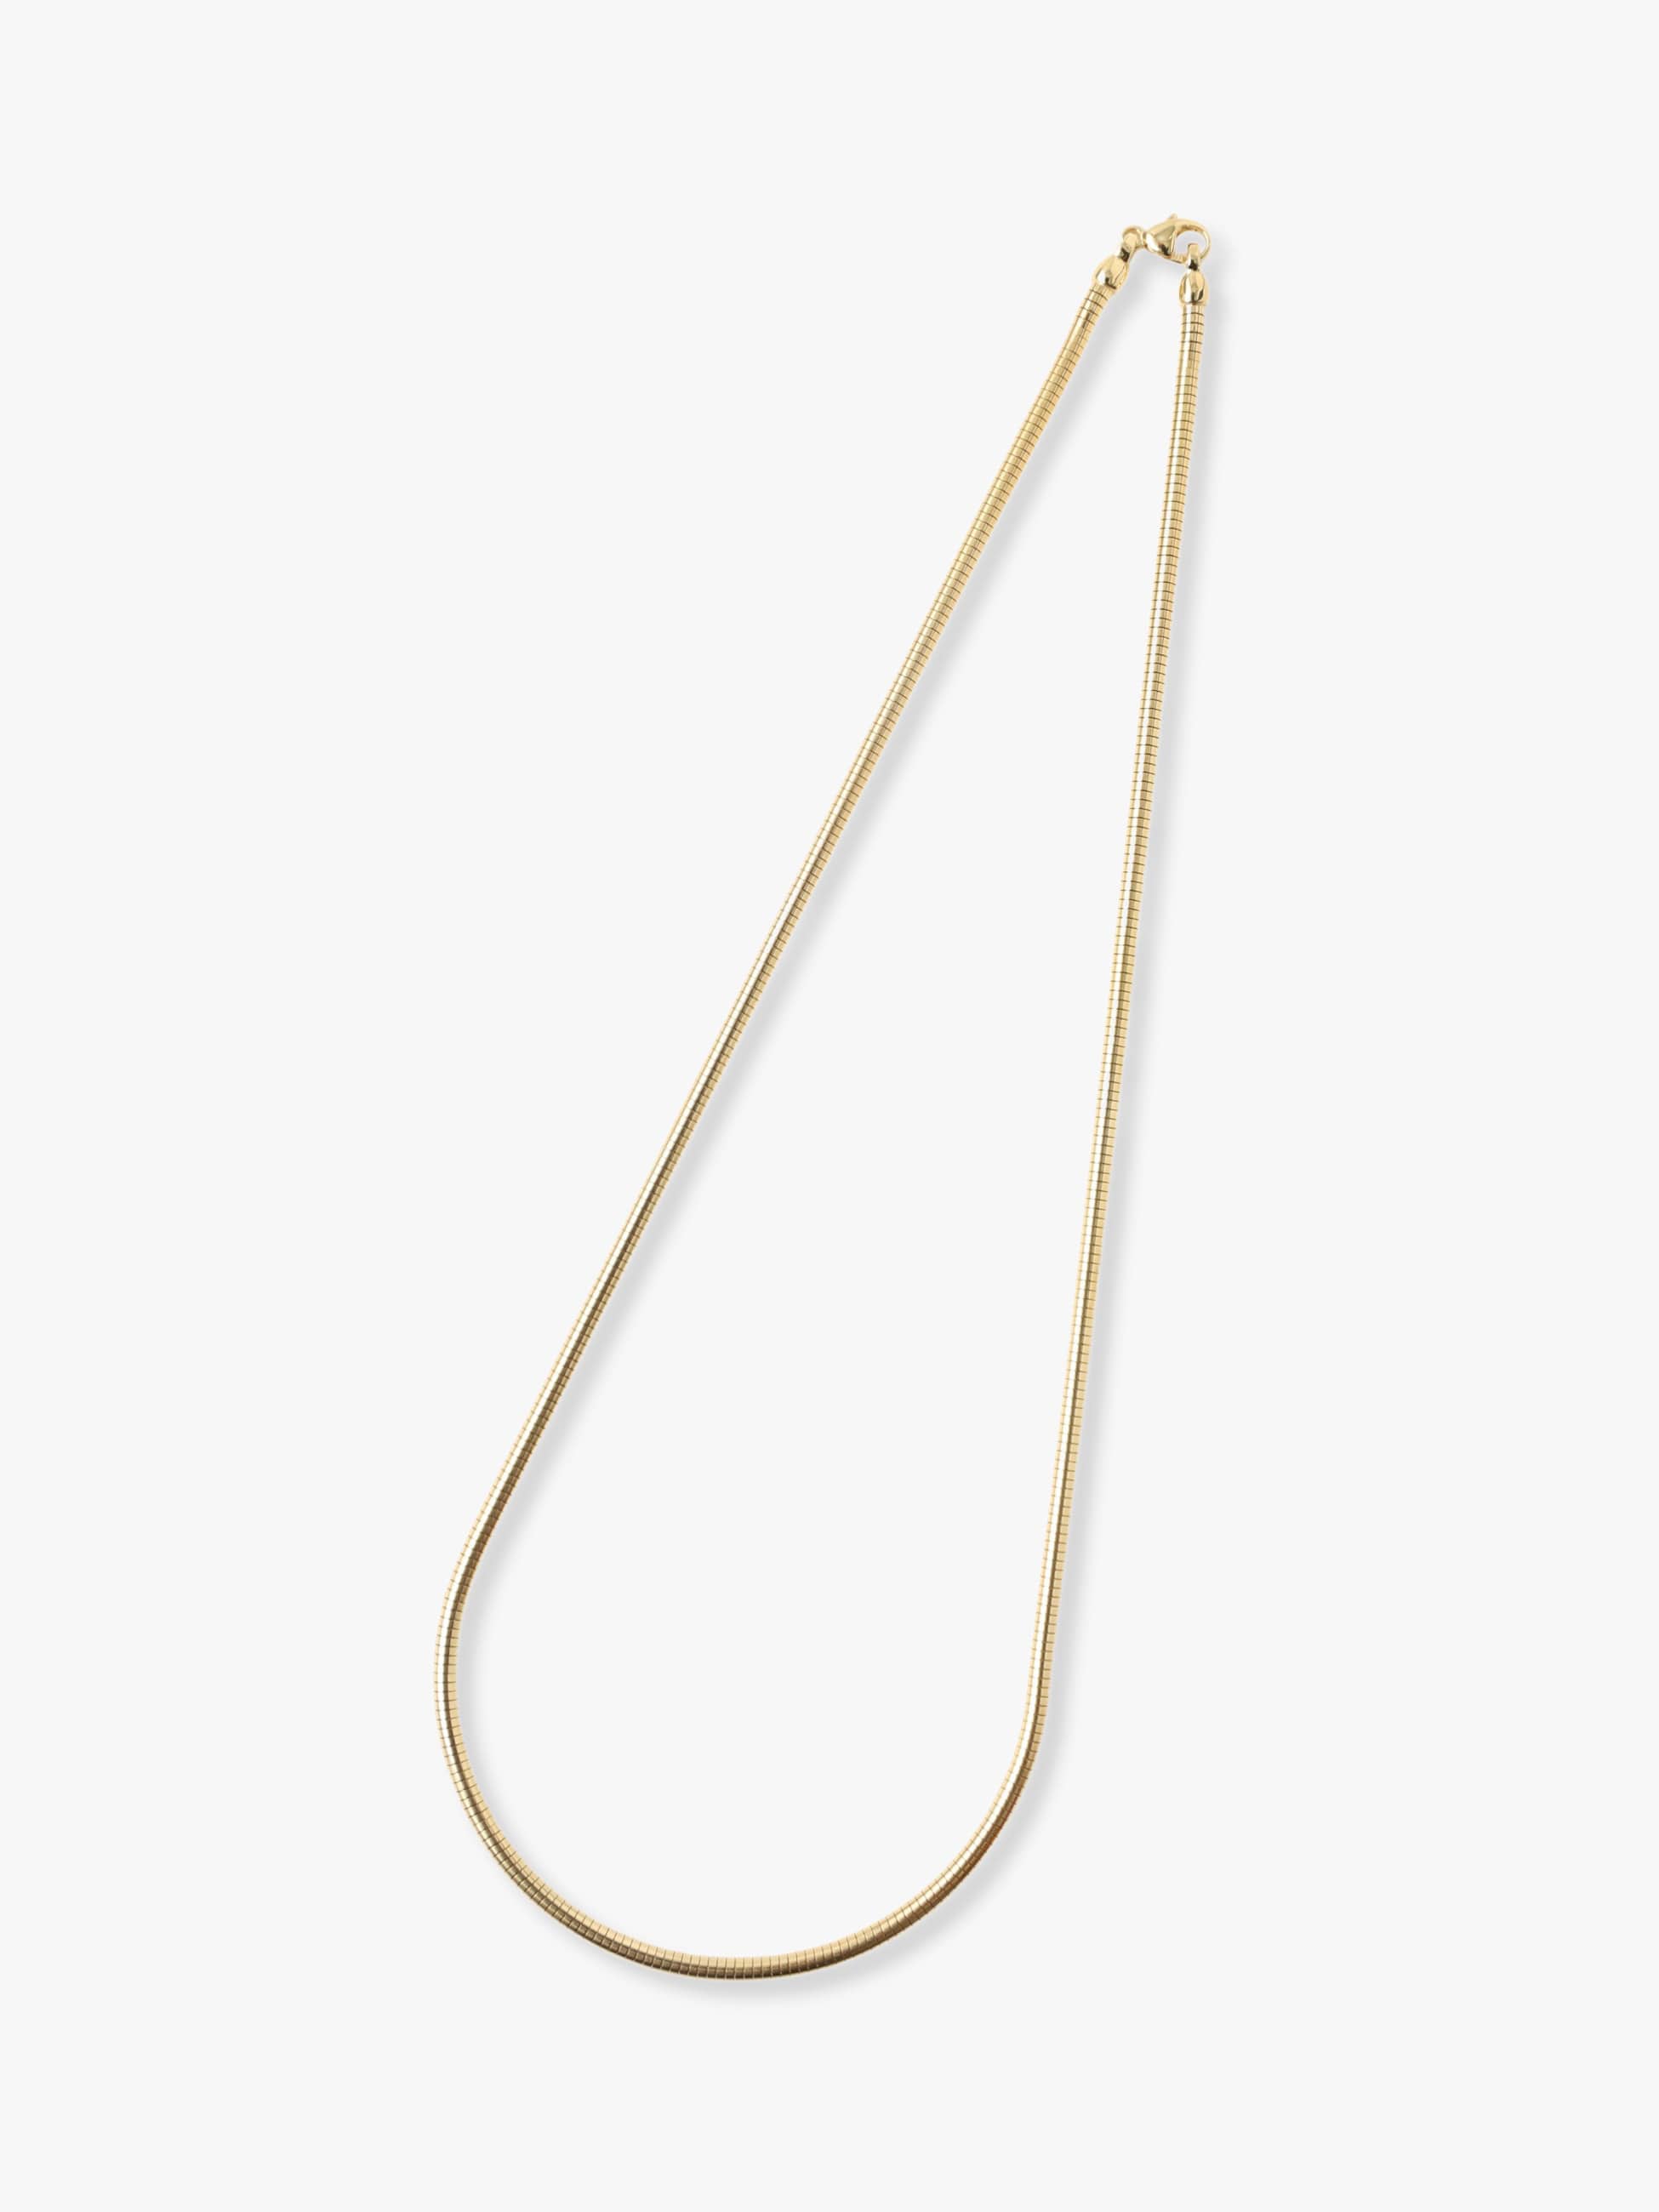 Silky Snake Chain Necklace (16inch) 詳細画像 yellow gold 2